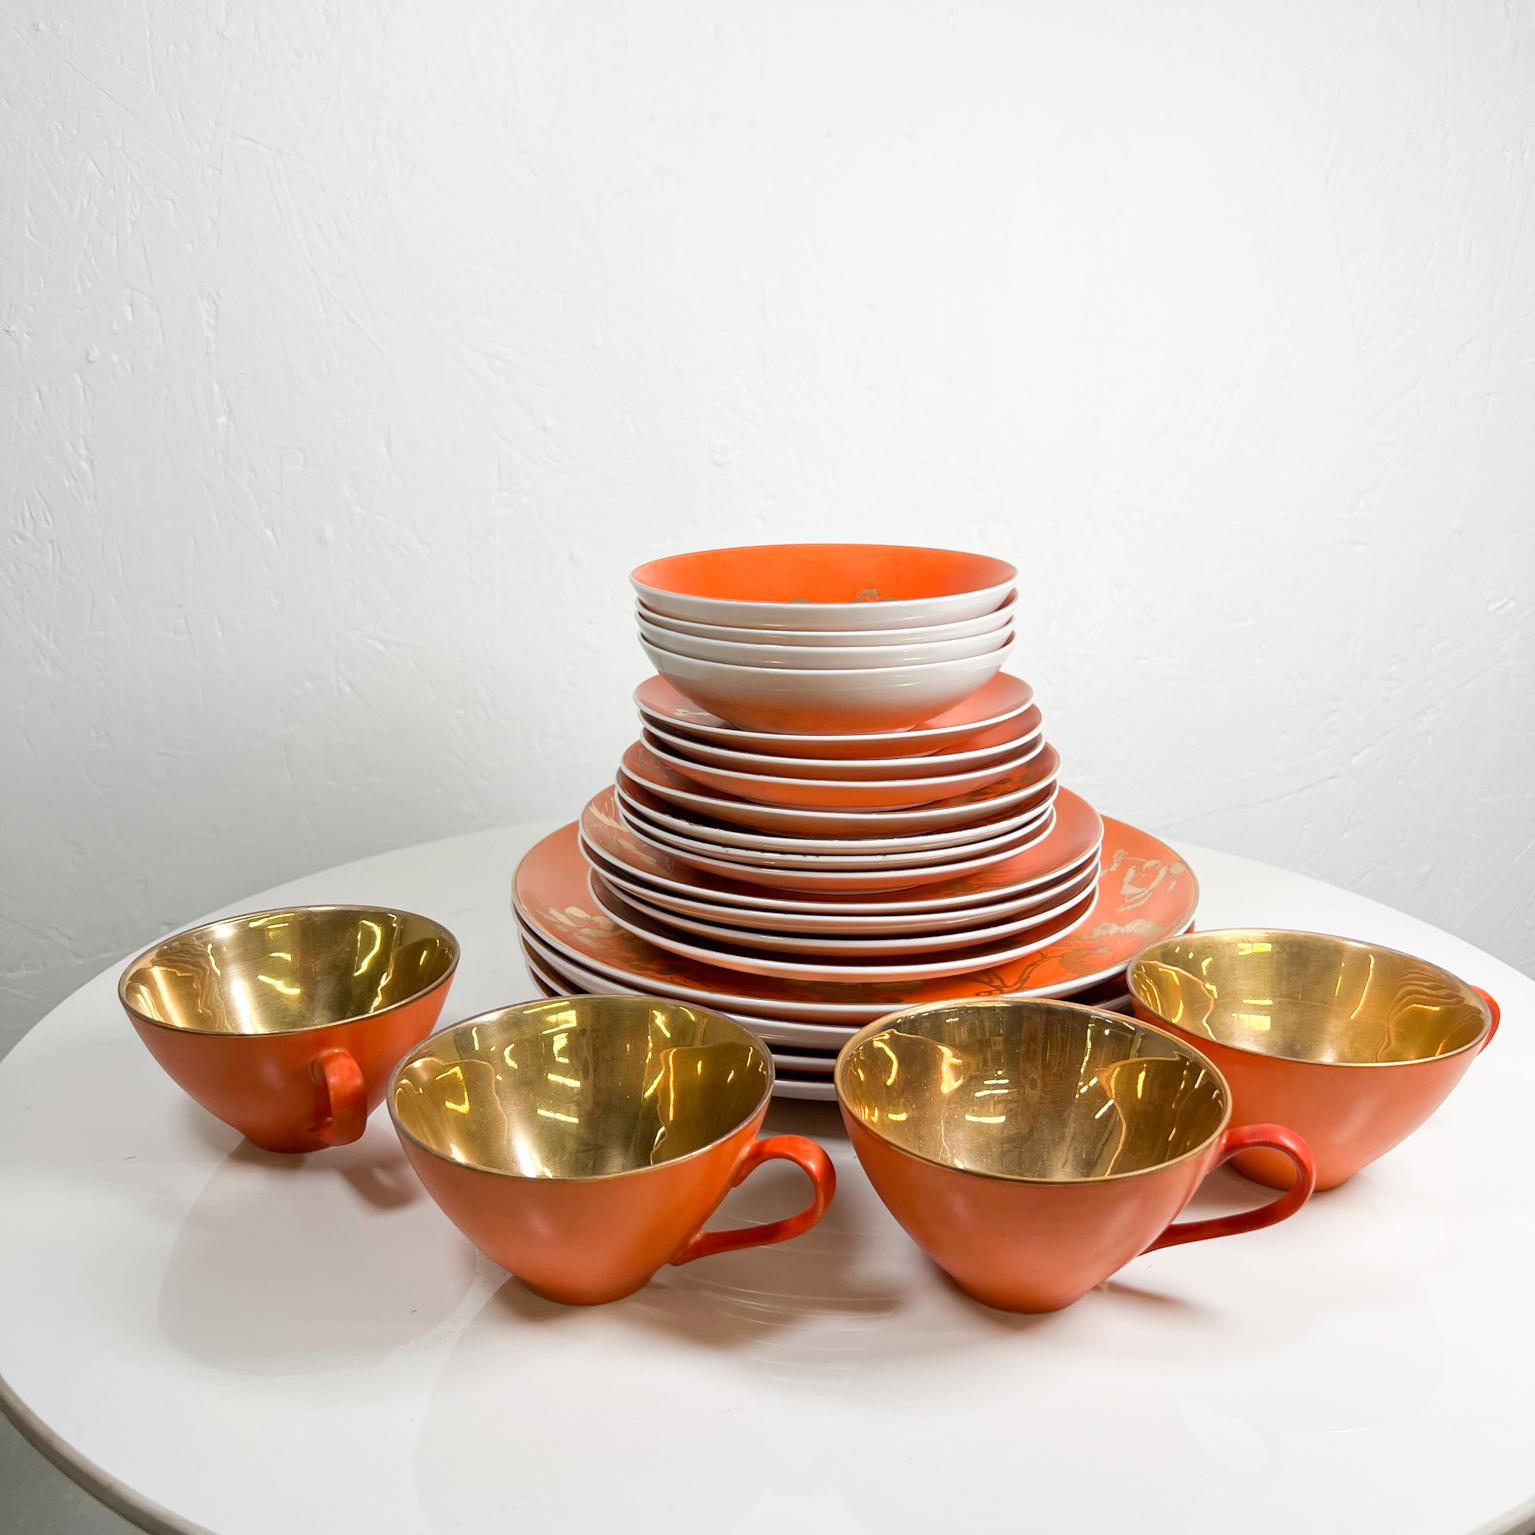 1960s Dorothy C. Thorpe California Persimmon pattern Orange & Gold Dinnerware Set
Service for four
Butterfly and floral design
Fine Bone China Ceramic
Maker stamped.
Set Includes 24 pieces (4) dinner plate 10.25 (4) Salad plate 7.75 (4) Bread plate